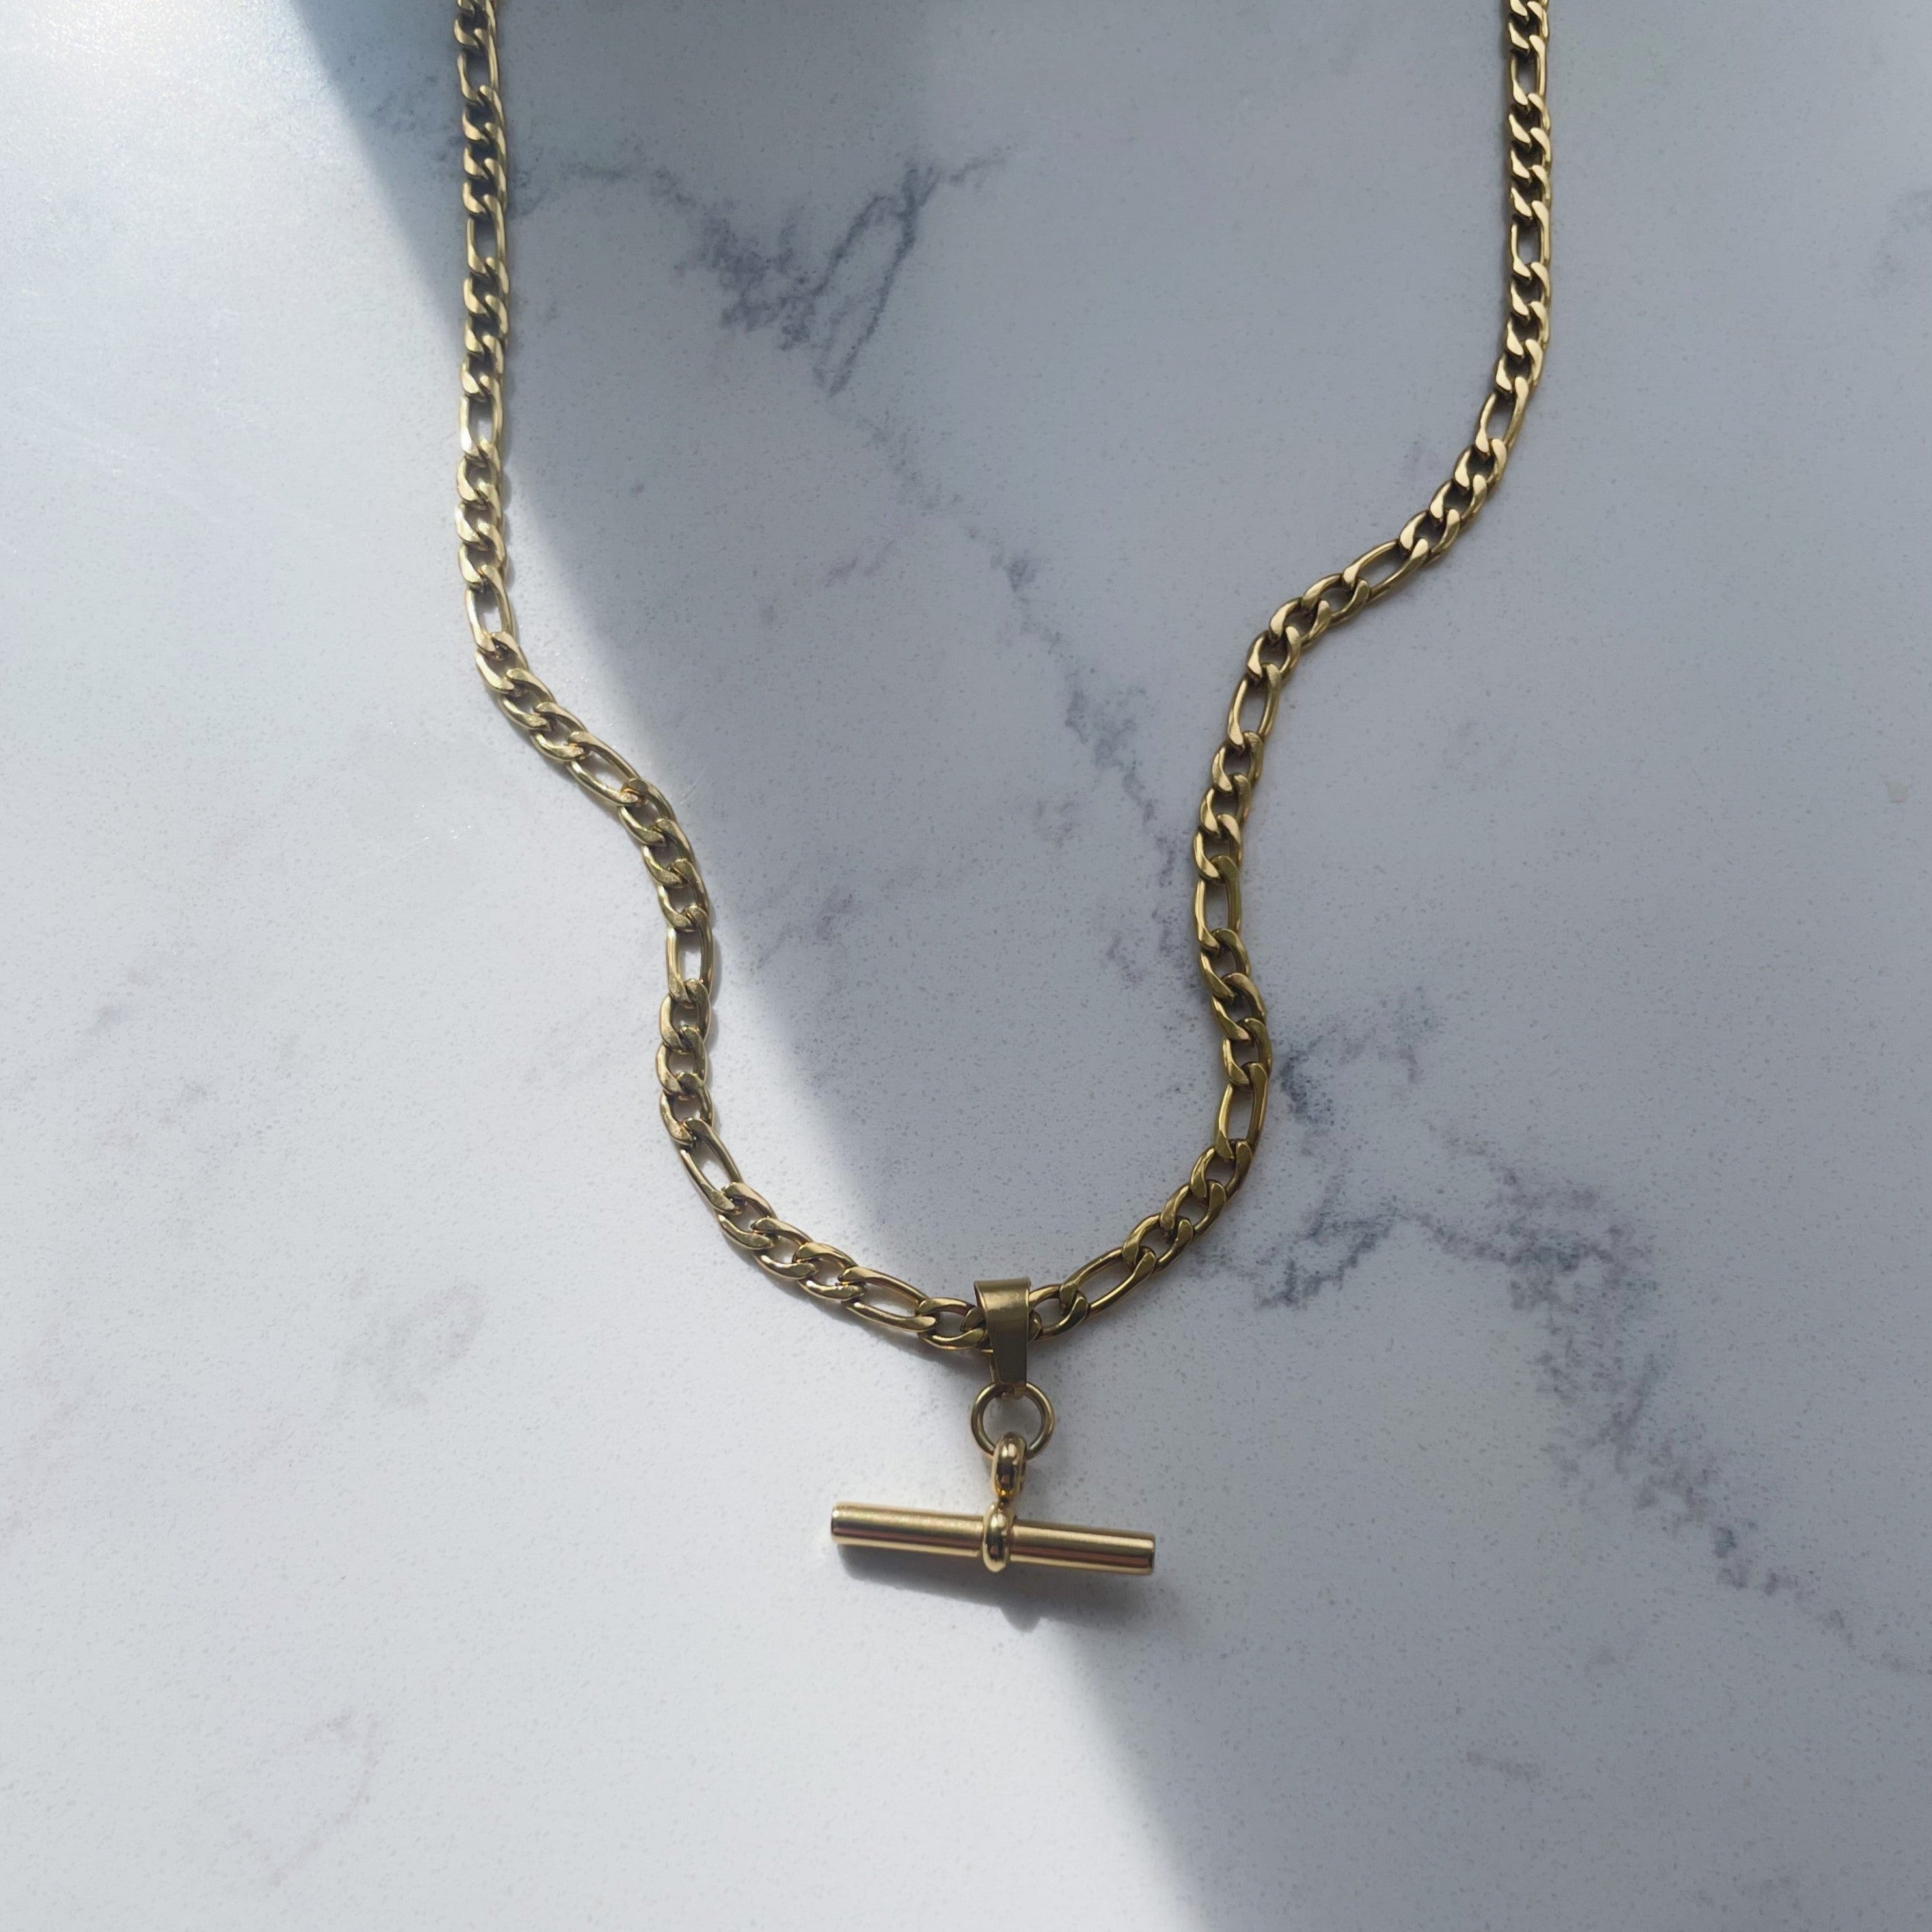 Gold T Bar Necklace for everyday wear